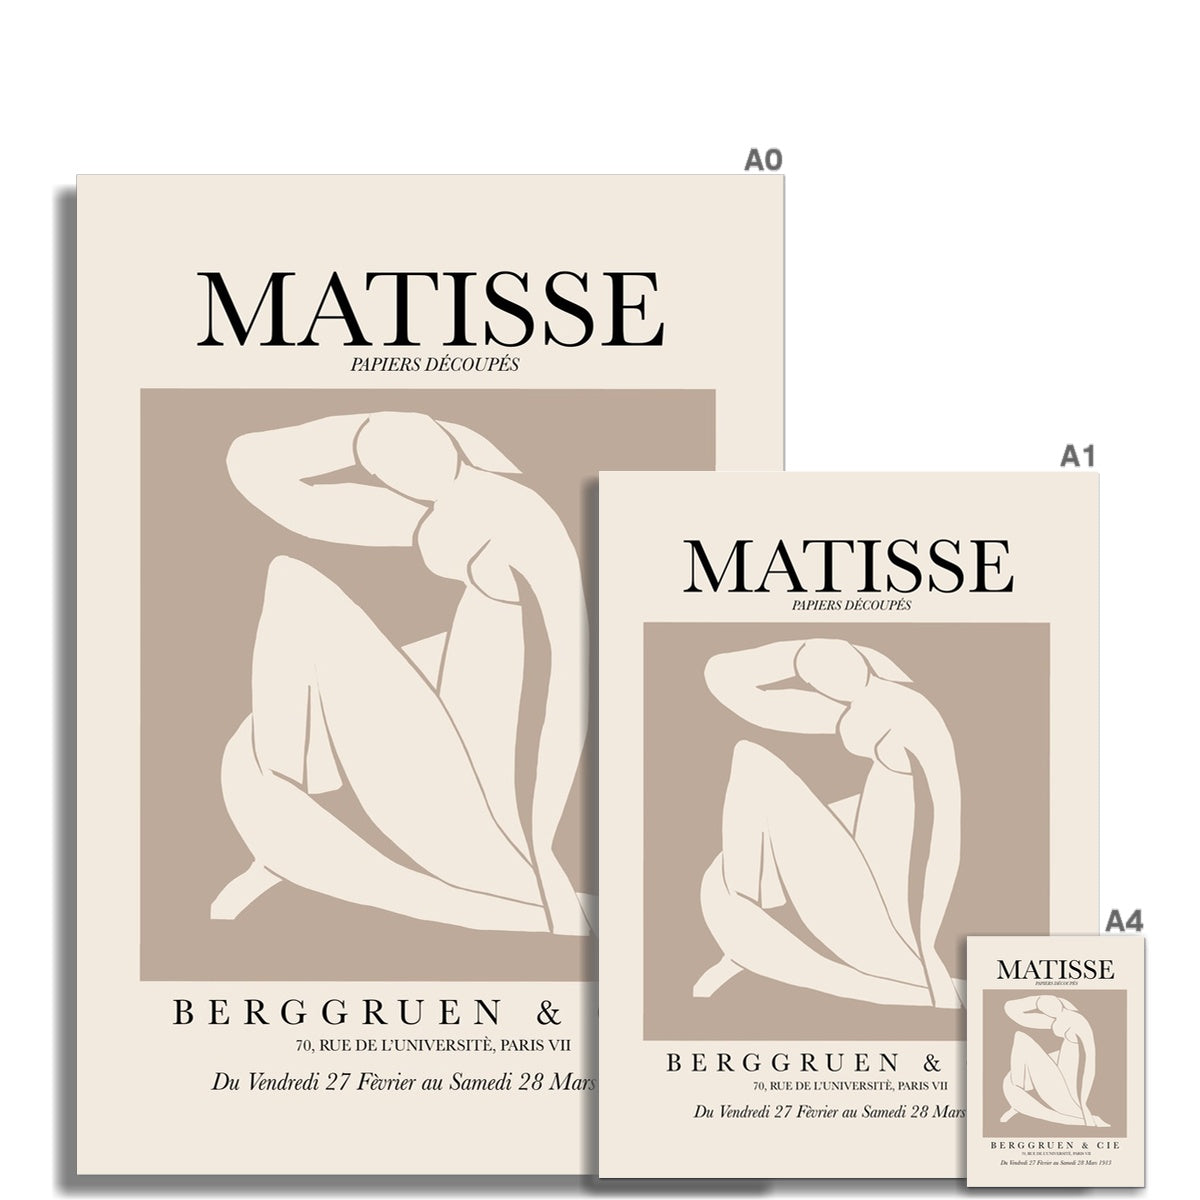 © les muses / Matisse wall art prints featuring nude figure cut outs or "Papiers Découpés" in a danish pastel style. Matisse exhibition posters with paper cut-outs. Berggruen & Cie museum prints for your gallery wall.